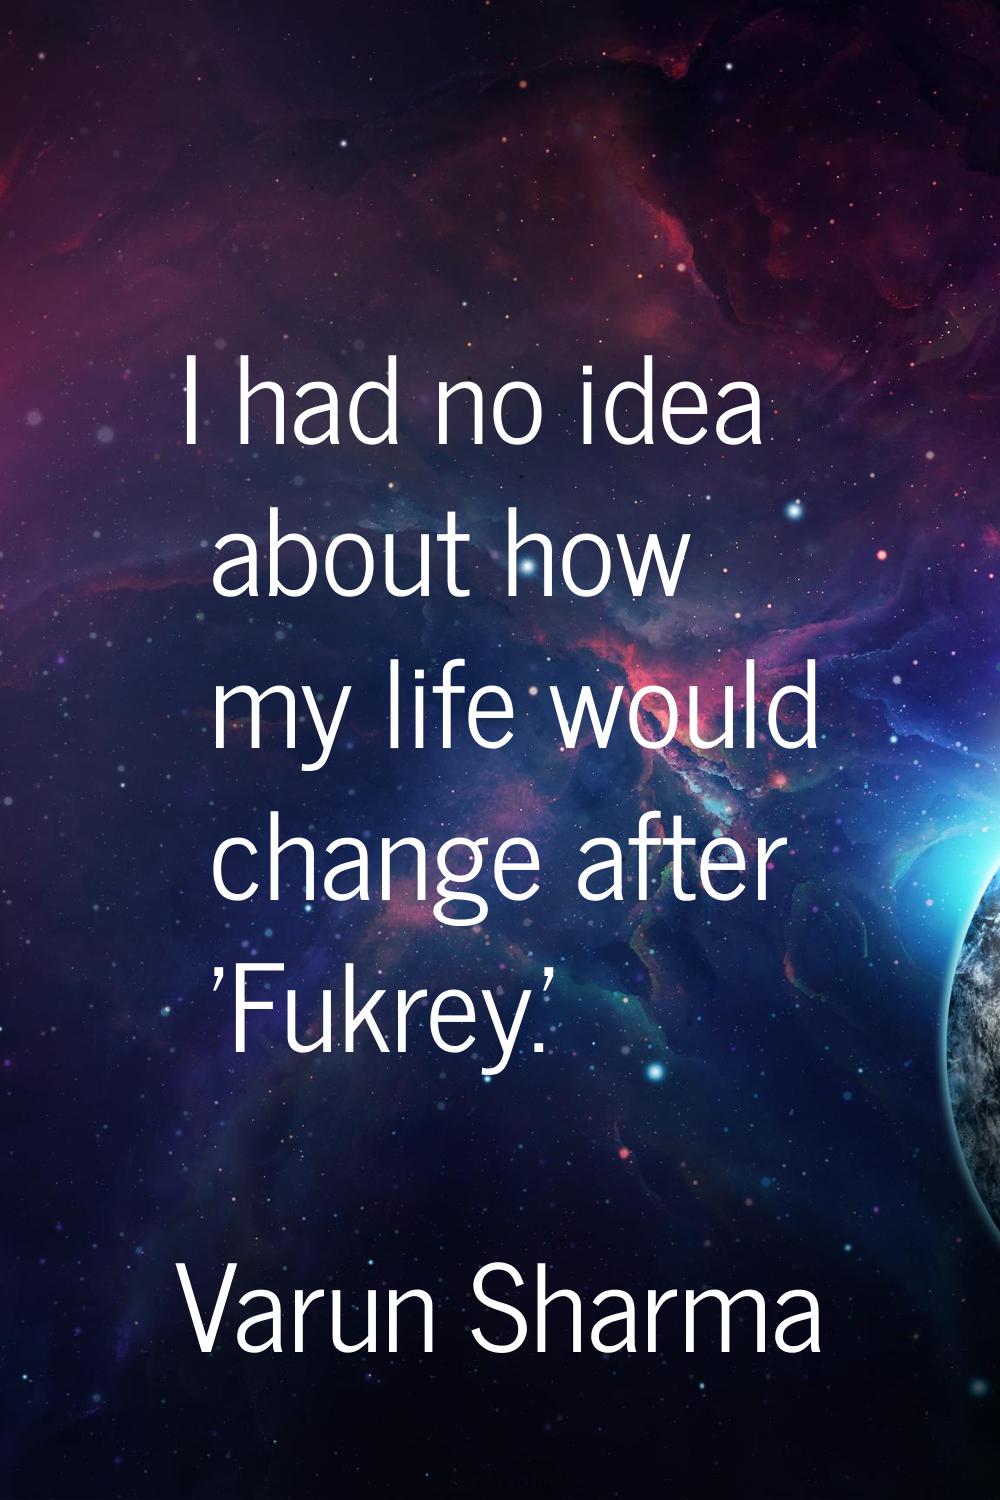 I had no idea about how my life would change after 'Fukrey.'